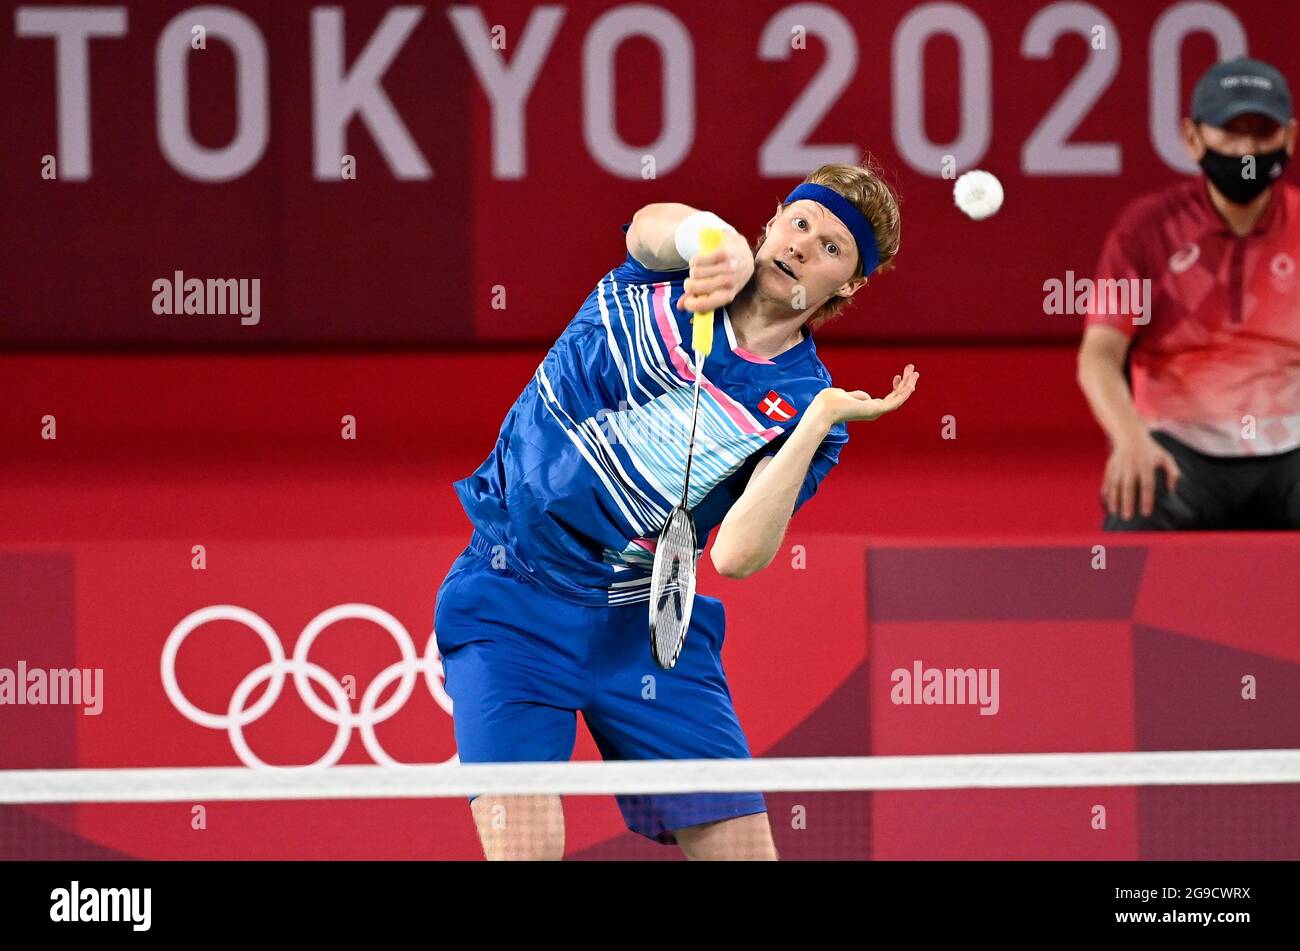 A. antonsen olympic games tokyo 2020